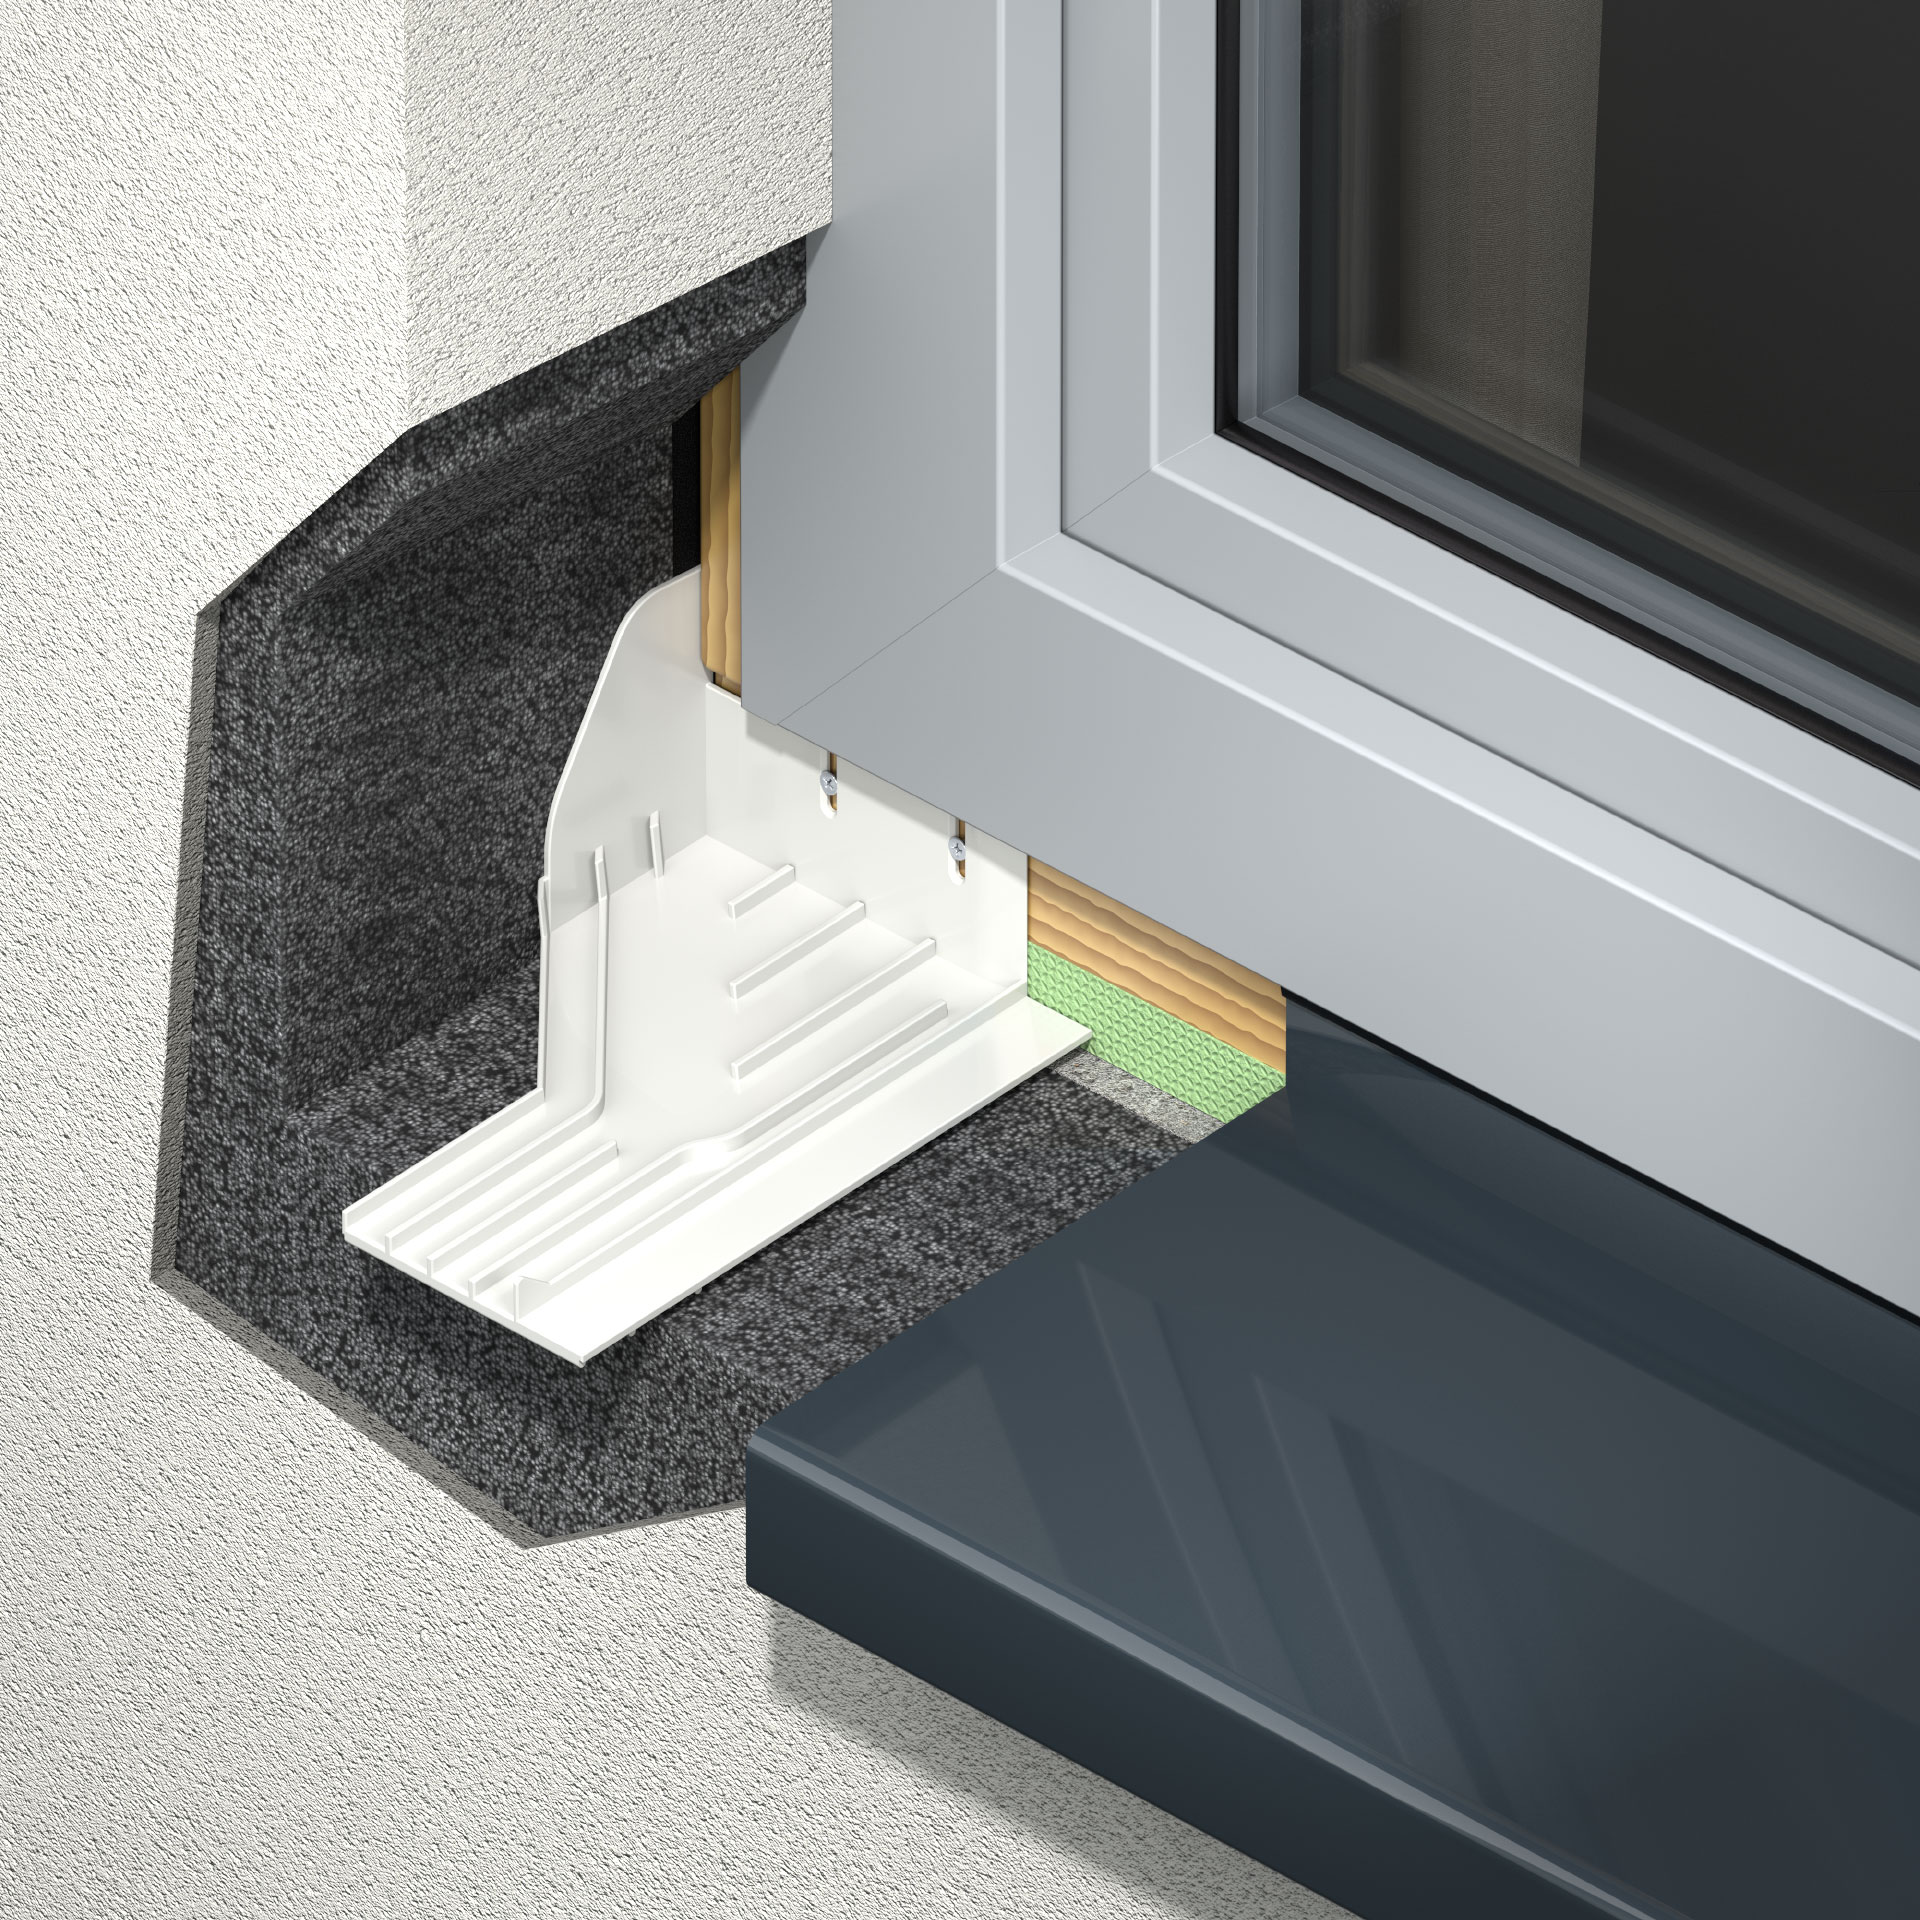 [Translate to EN_GB:] Connections to windows & rolling shutters for plaster & ETIC – water that gets into the structure via the structural connection (window, rolling shutter guide rail, window sill) is drained to the outside using a controlled system.